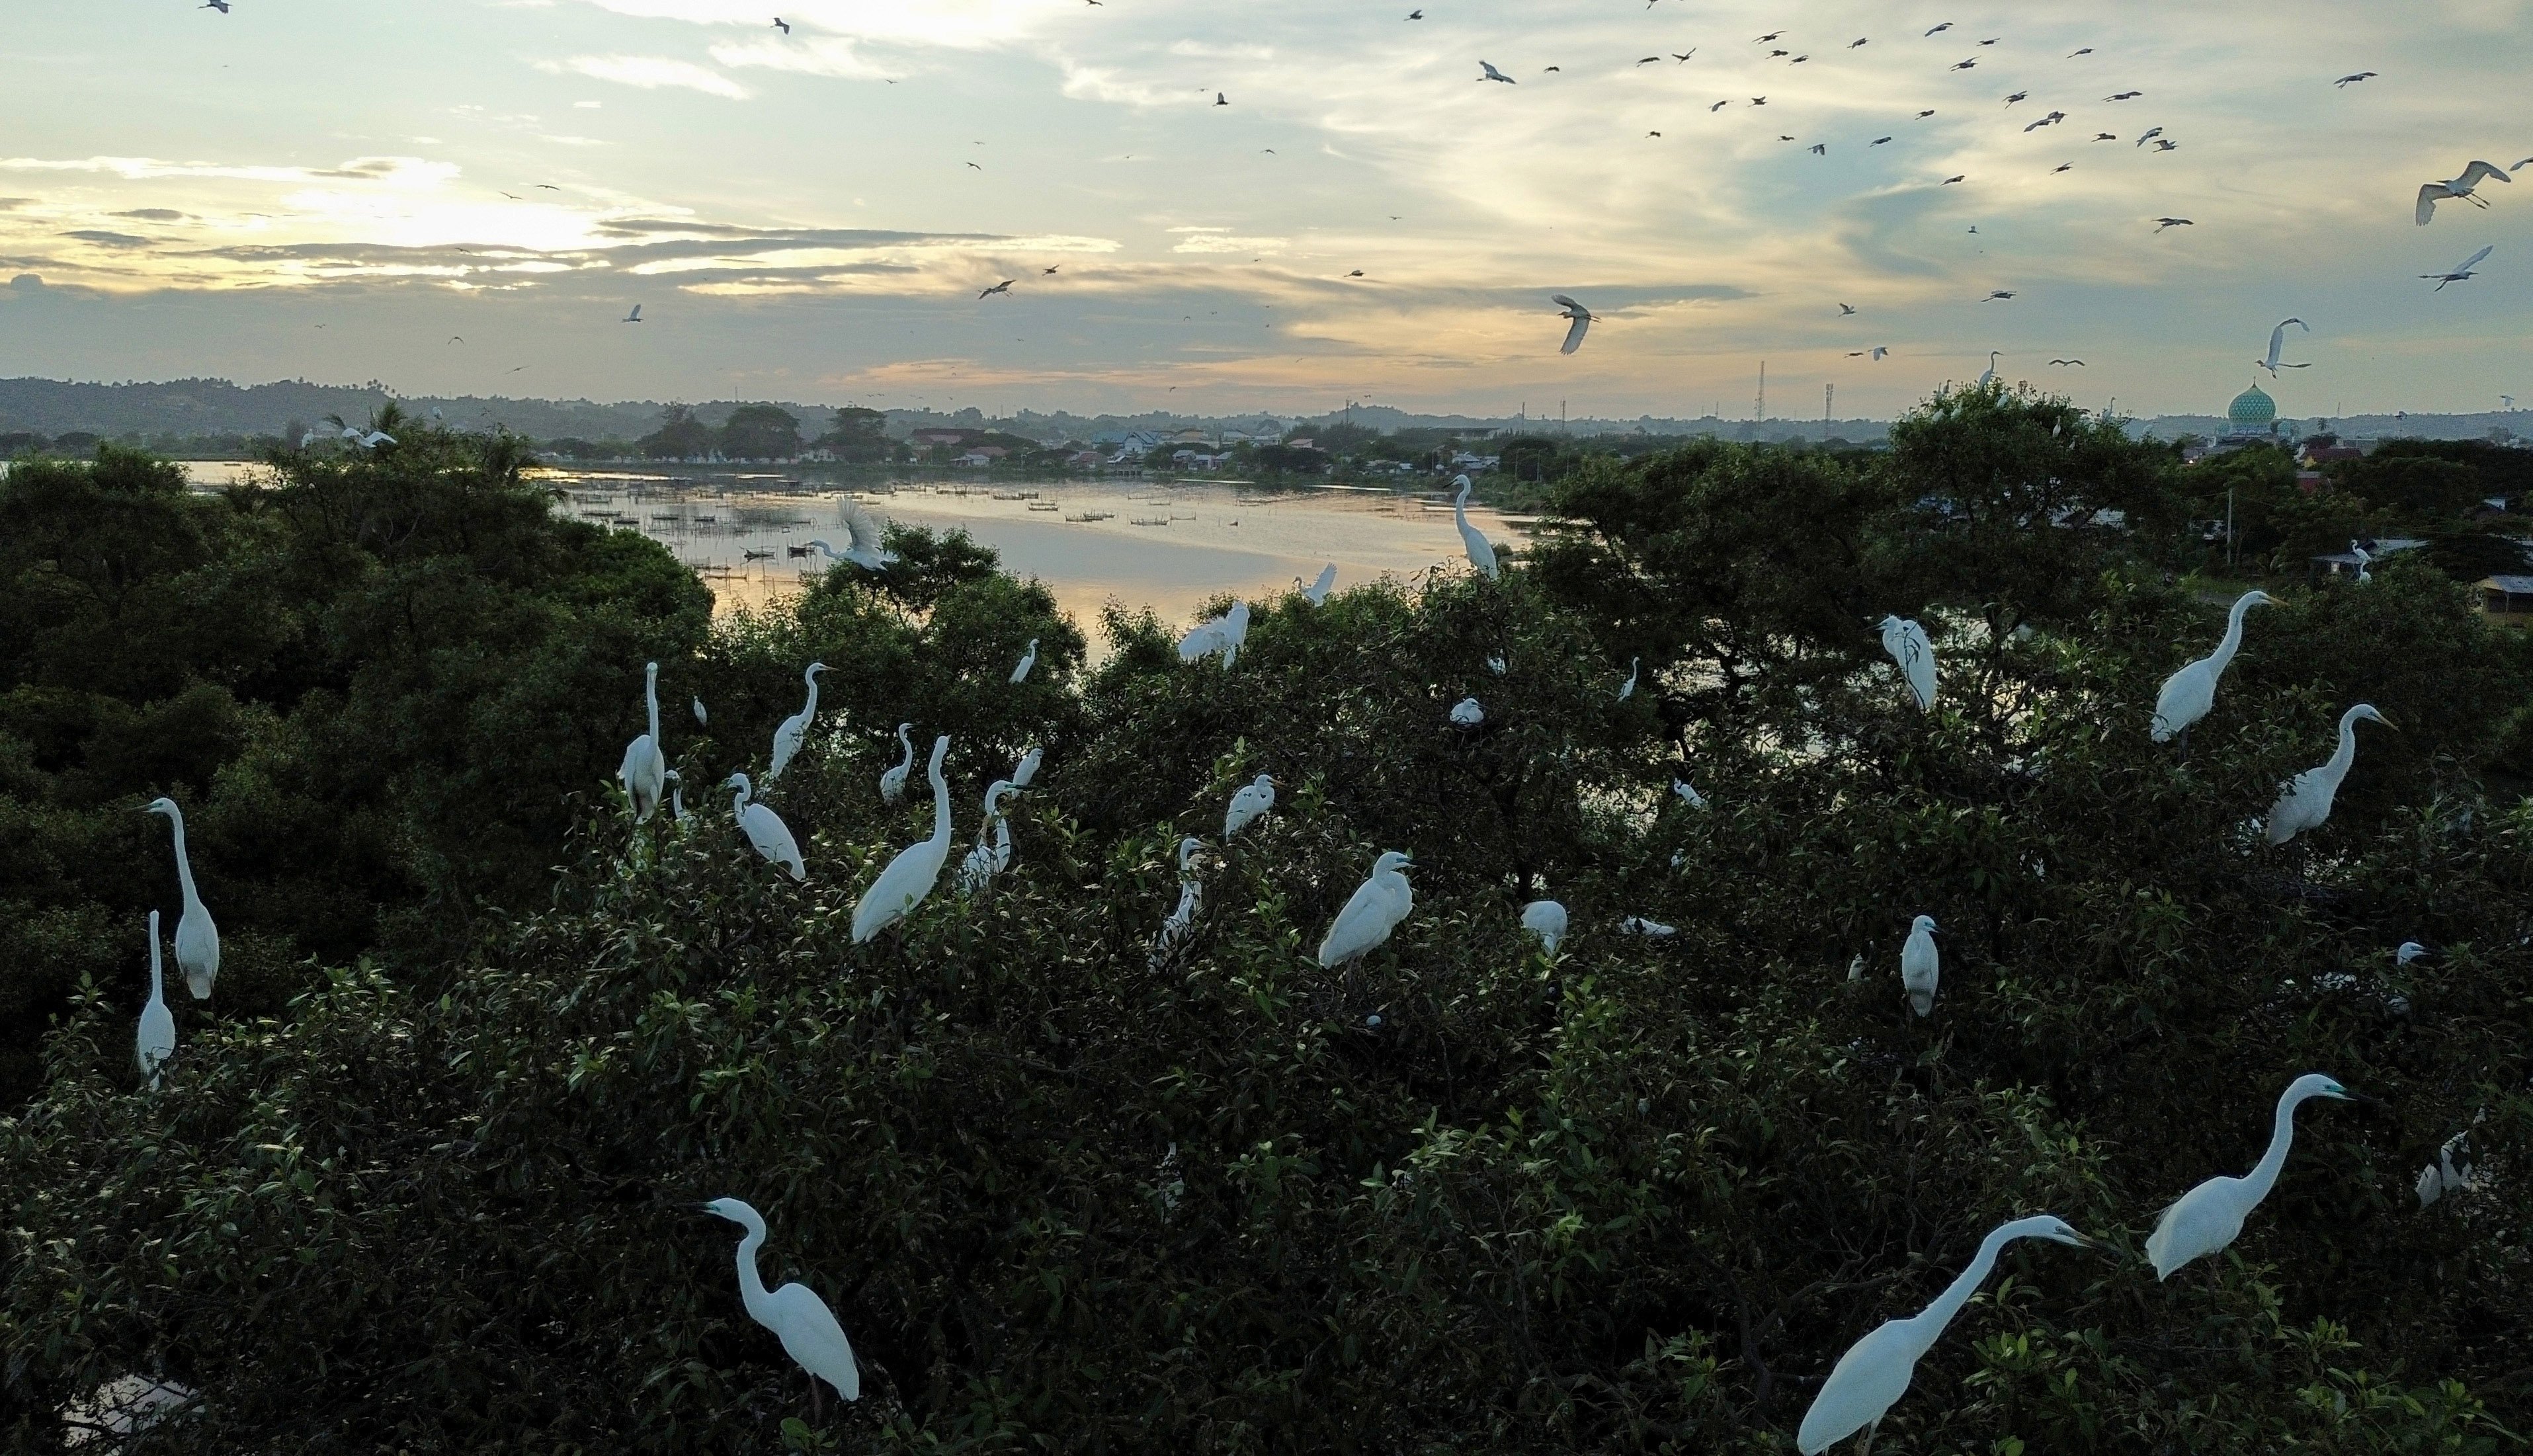 Egrets perch on mangroves in Lhokseumawe, Aceh Province, Indonesia. Indonesia is home to over a third of the world’s mangroves. Photo: Xinhua